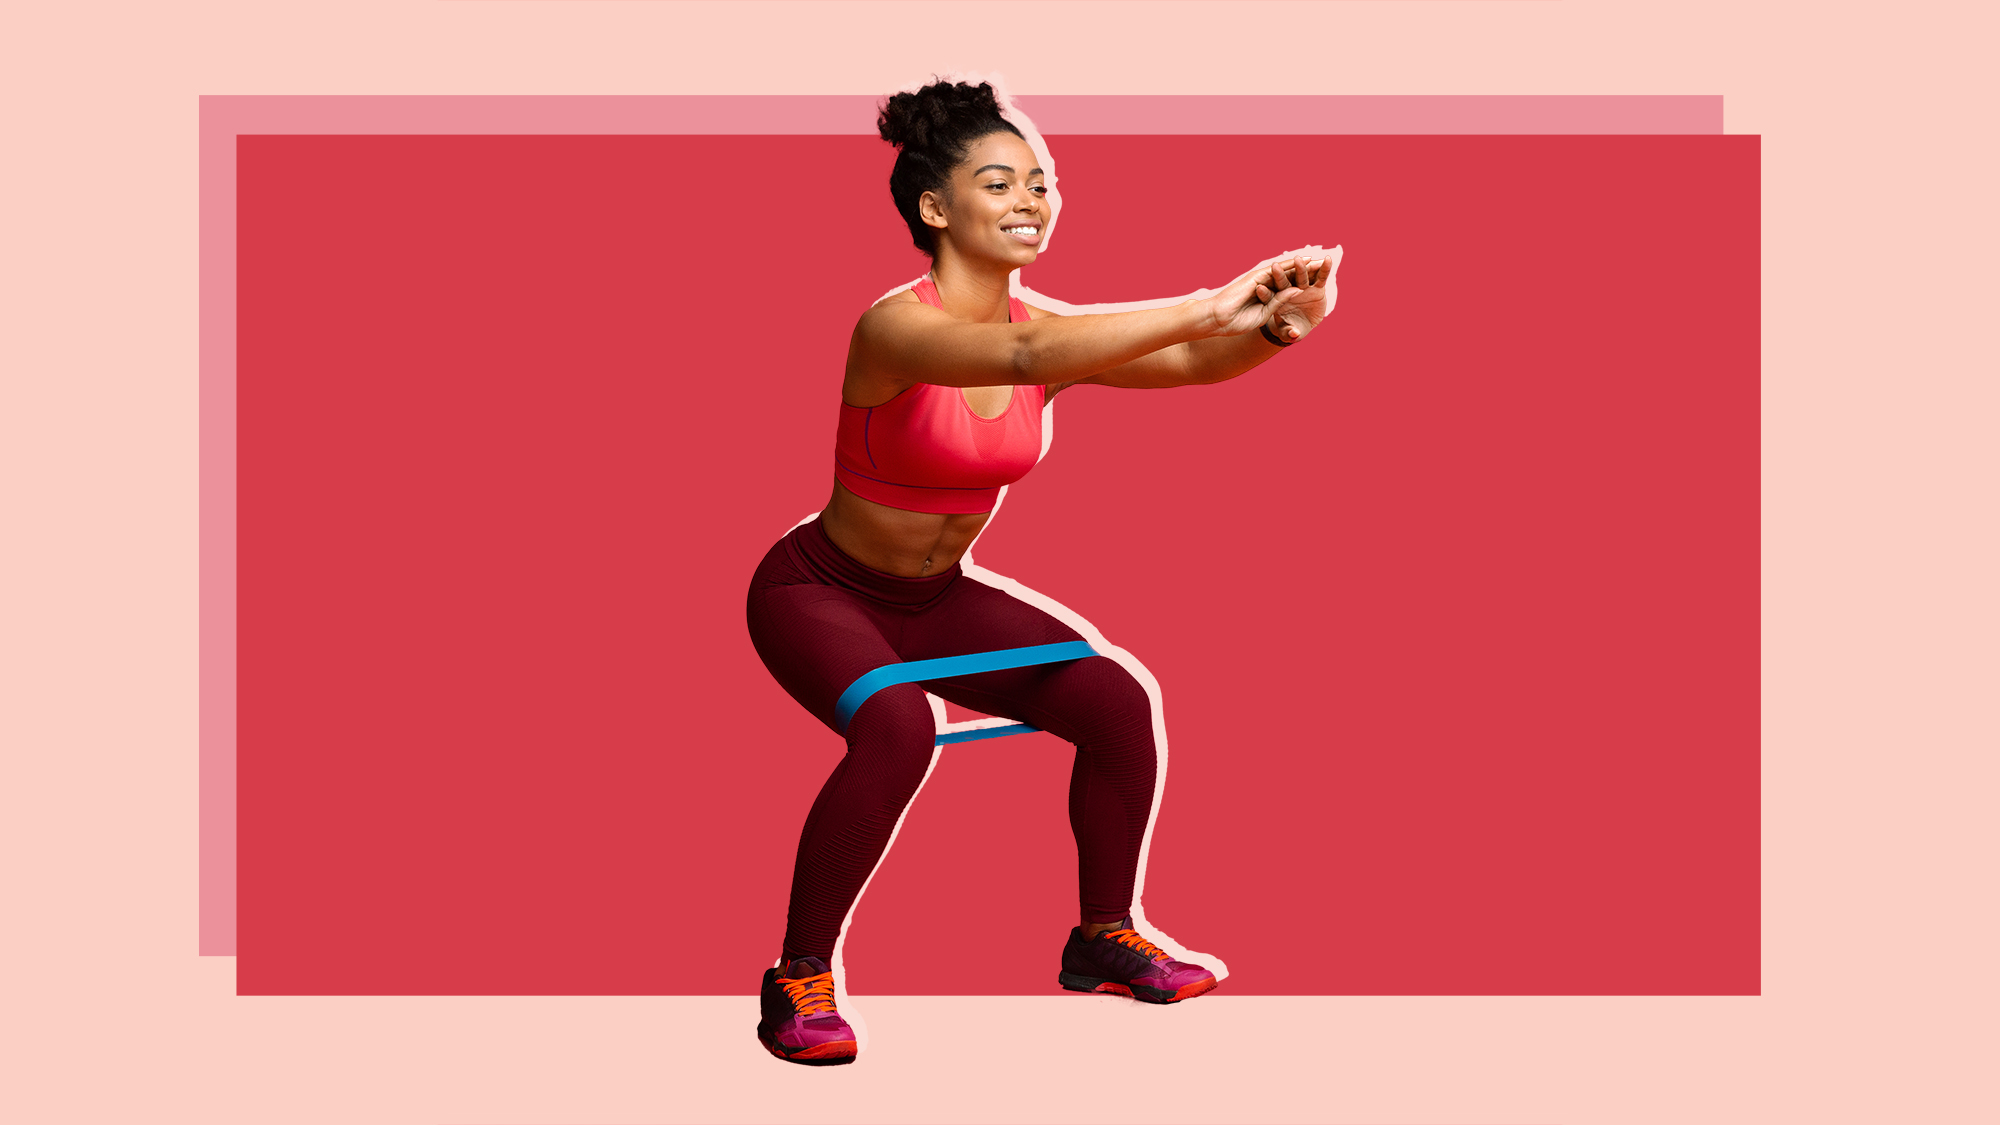 tiktok-resistance-bands-squatting , Young sporty smiling black woman doing stretching work out with elastic bands, squating over red studio background